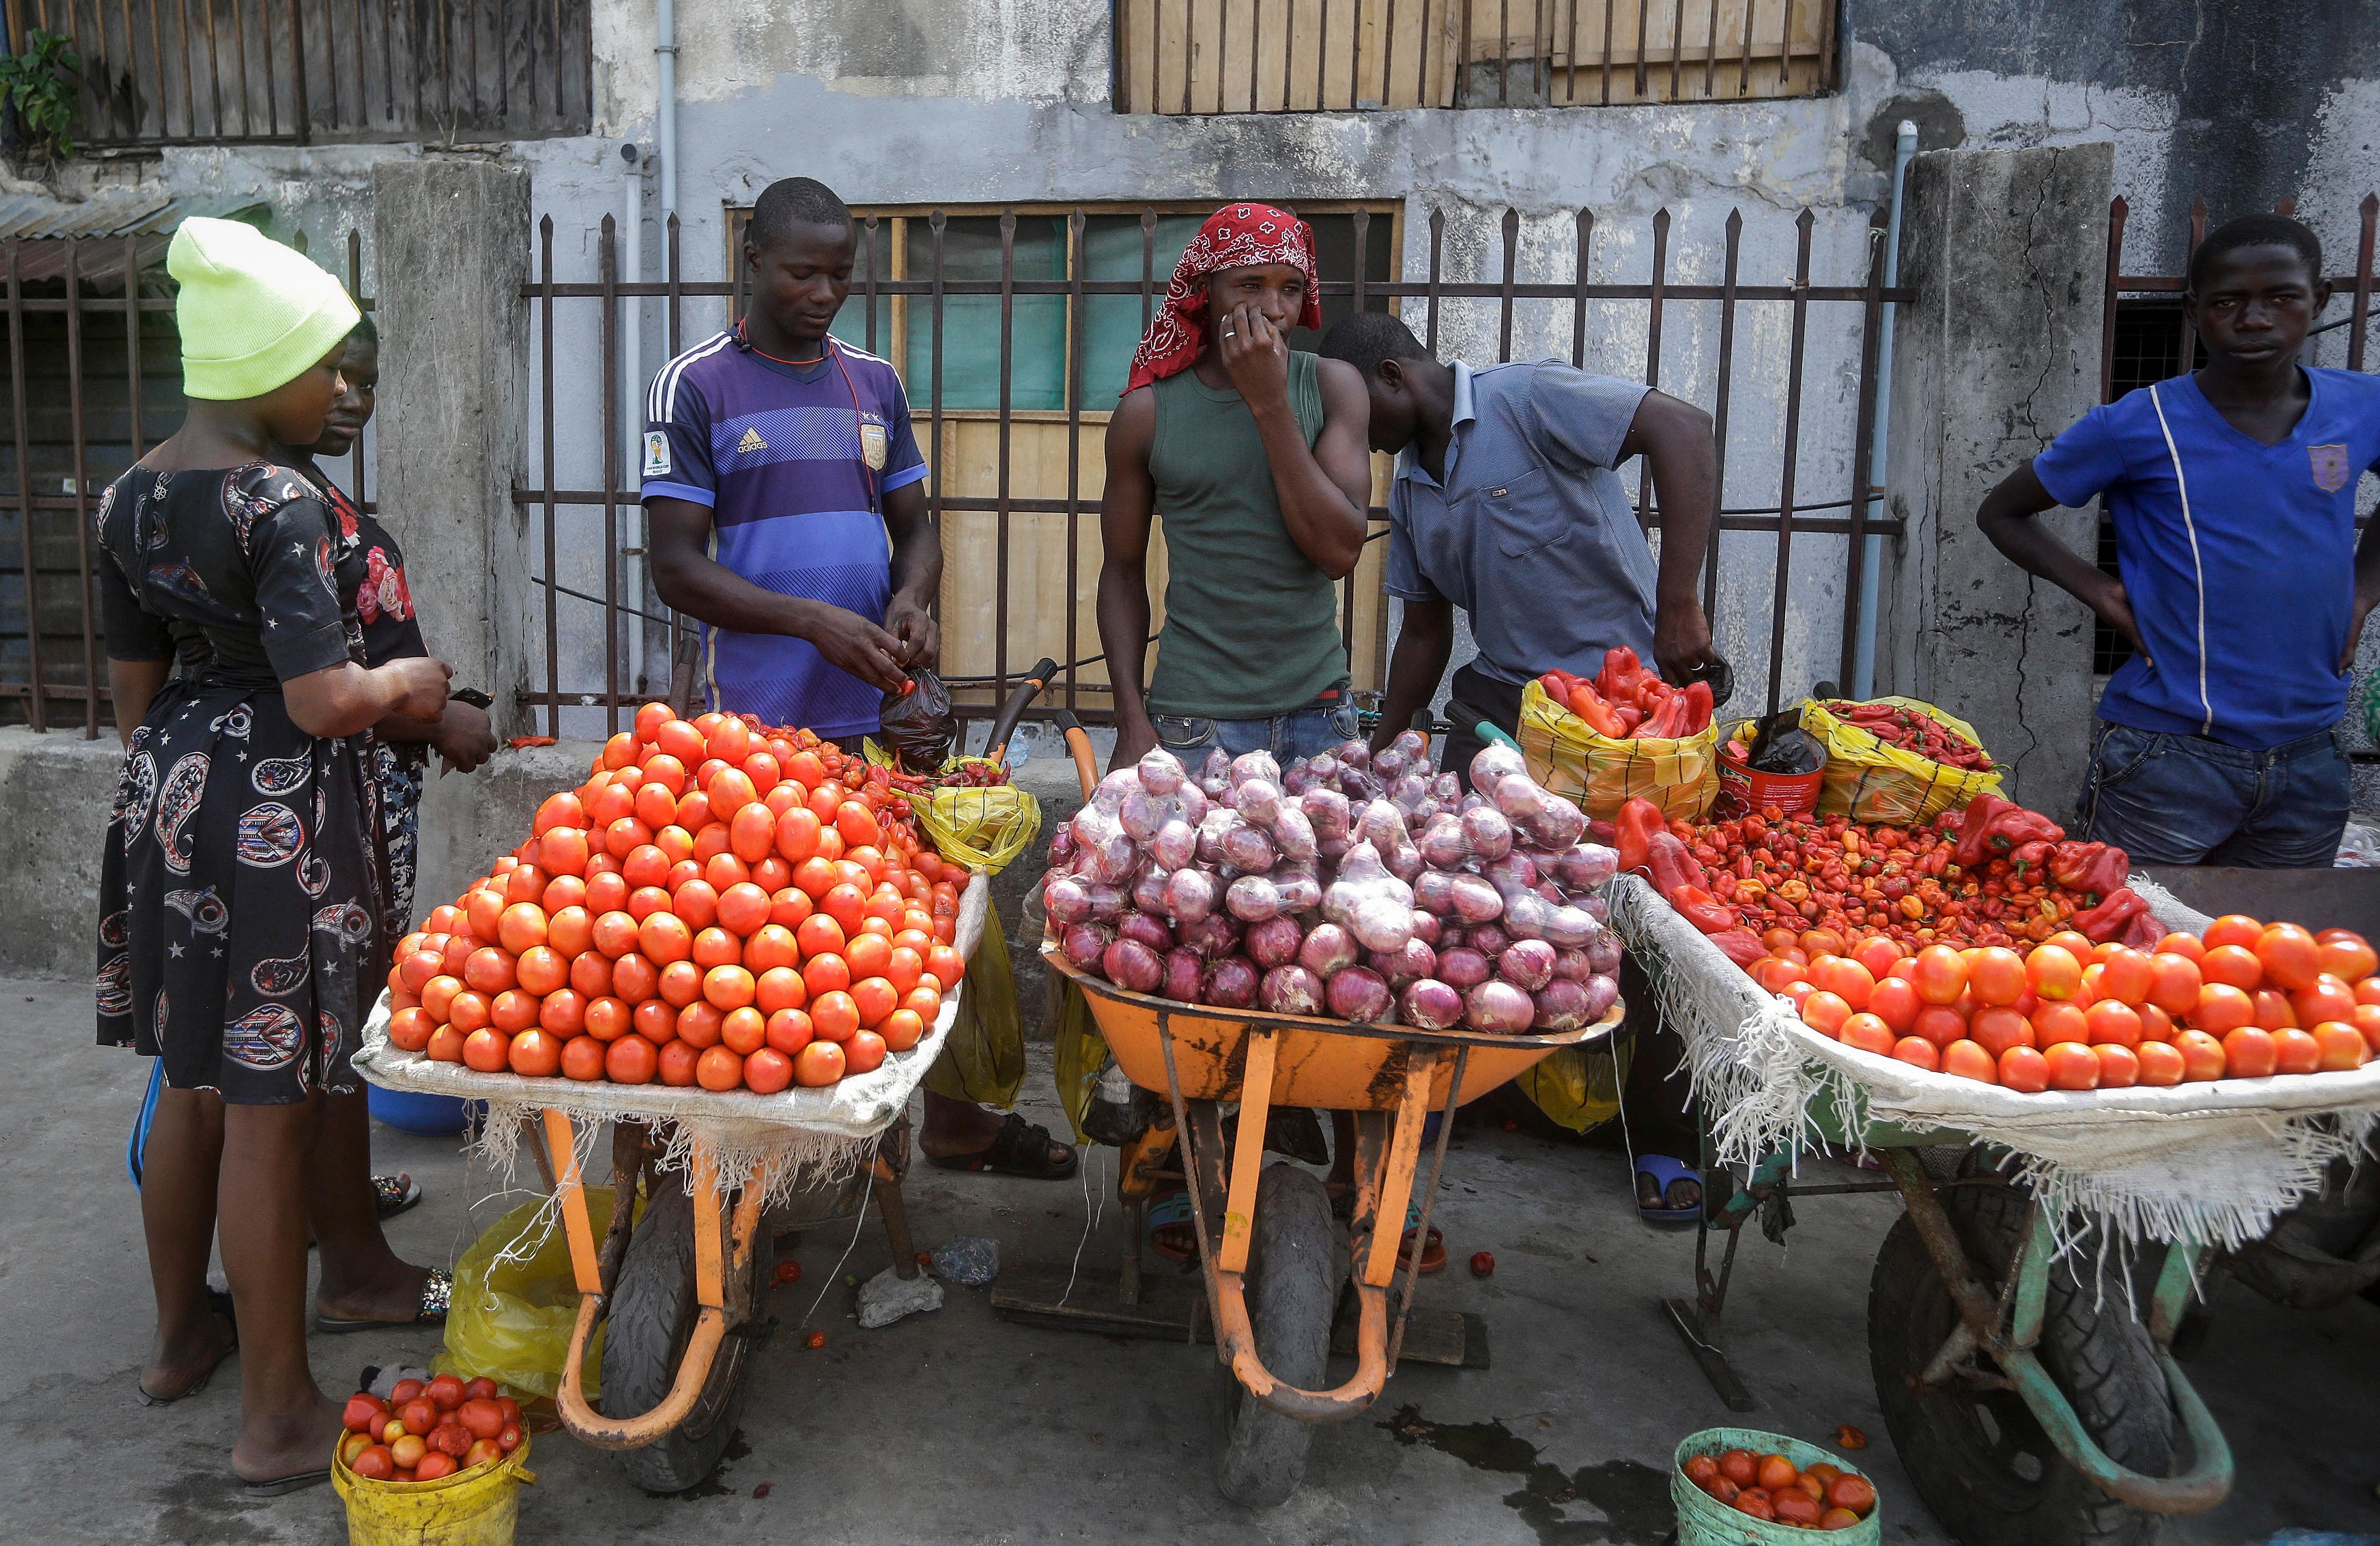 FILE - In this April 13, 2020, file photo, a woman buys tomatoes and onions from street sellers in Lagos, Nigeria. Lockdowns in Africa limiting the movement of people in an attempt to slow the spread of the coronavirus are threatening to choke off supplies of what the continent needs the most: Food. (AP Photo/Sunday Alamba, File)